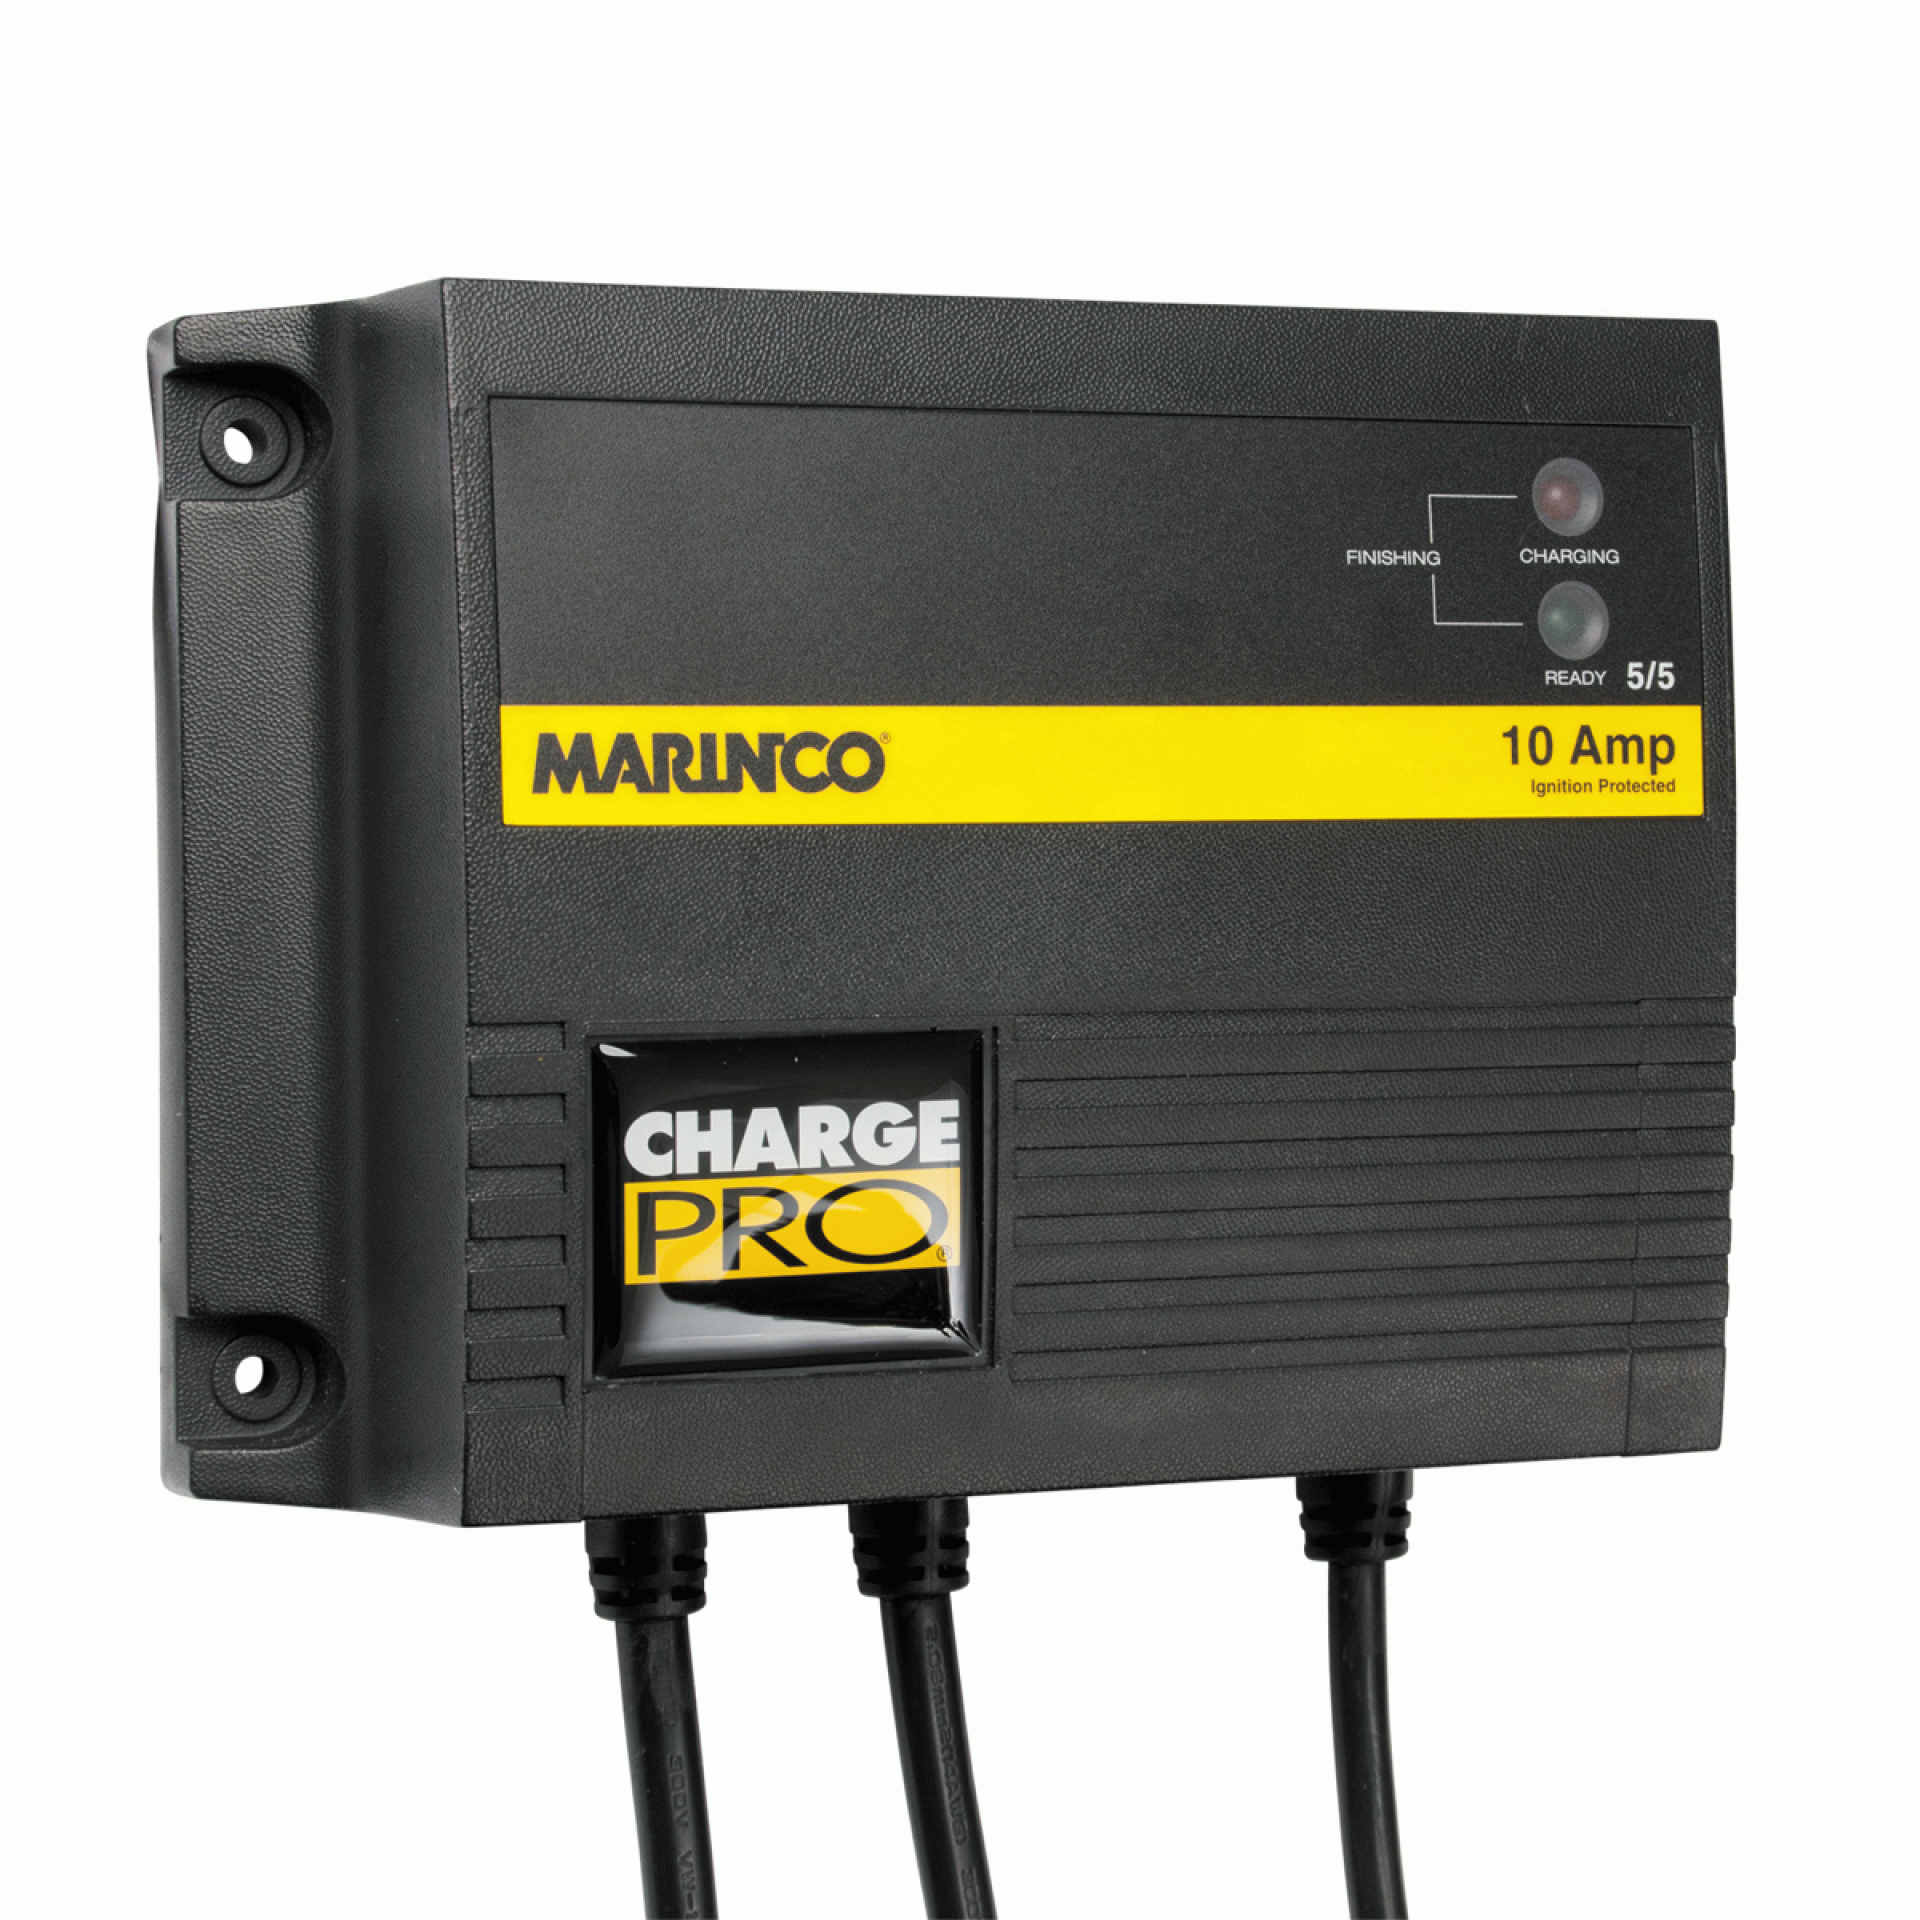 MARINCO | 28210 | CHARGE PRO BATTERY ONBOARD CHARGER 10 AMP 2 OUTPUT 12V/24v